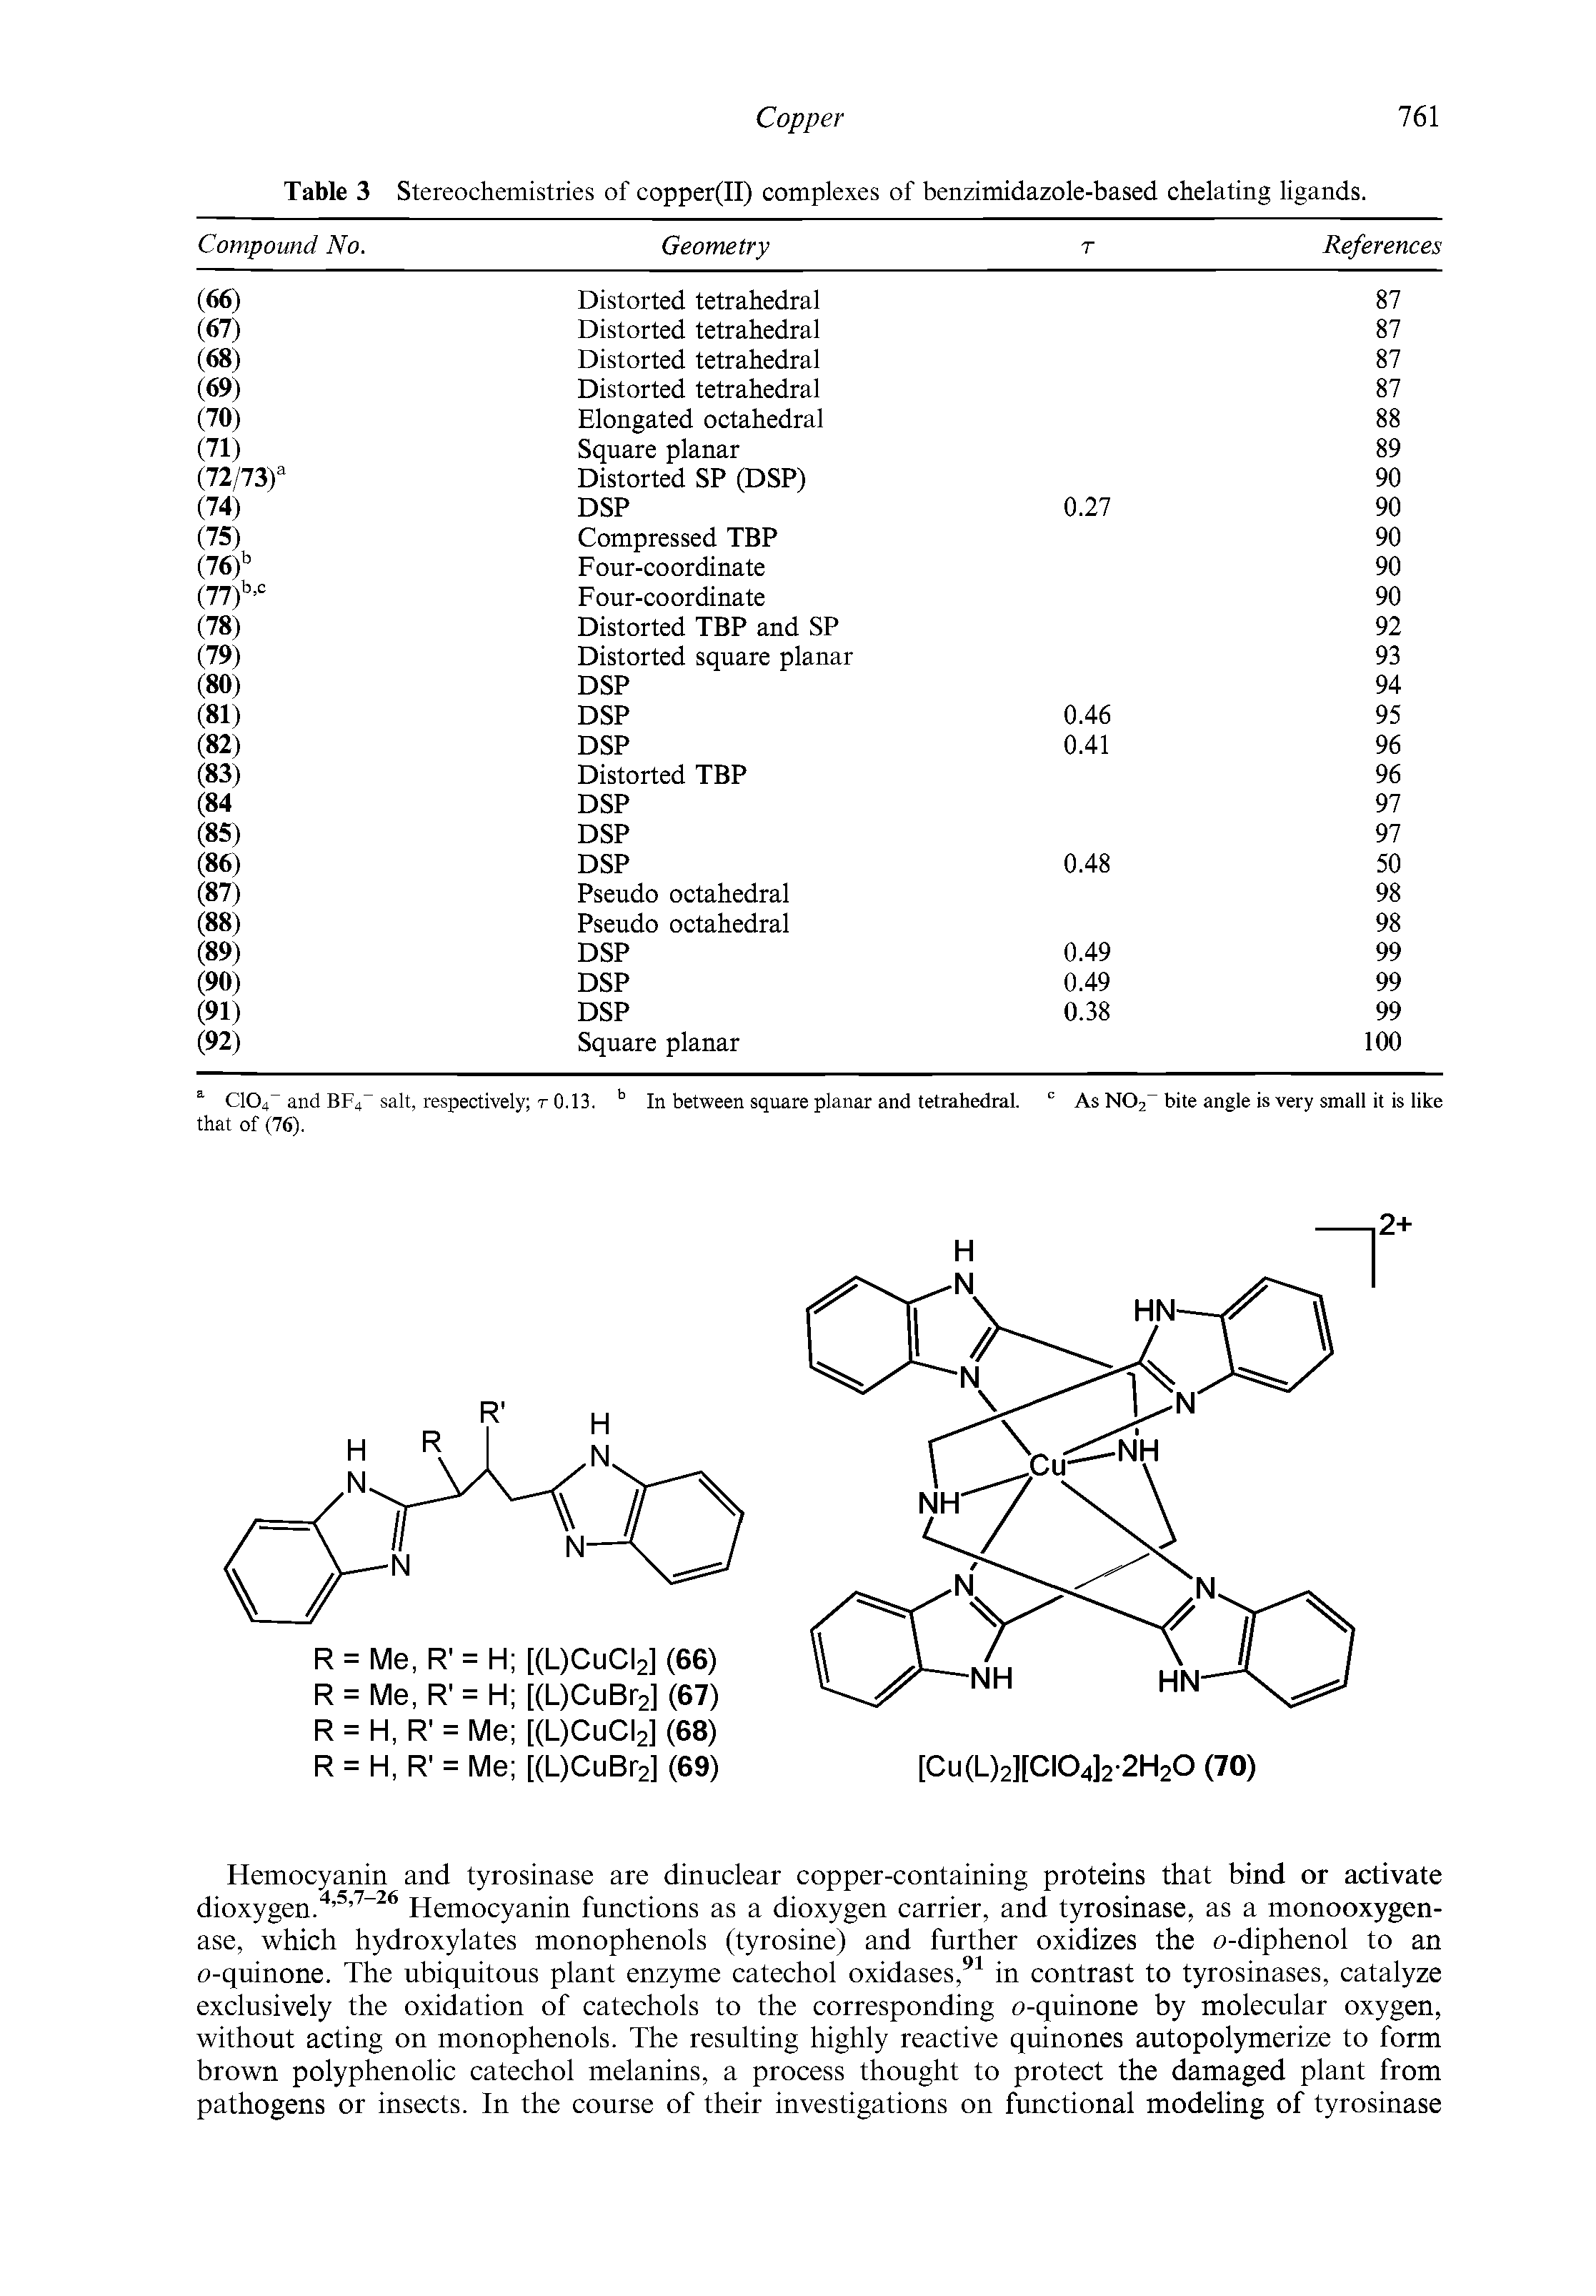 Table 3 Stereochemistries of copper(II) complexes of benzimidazole-based chelating ligands.